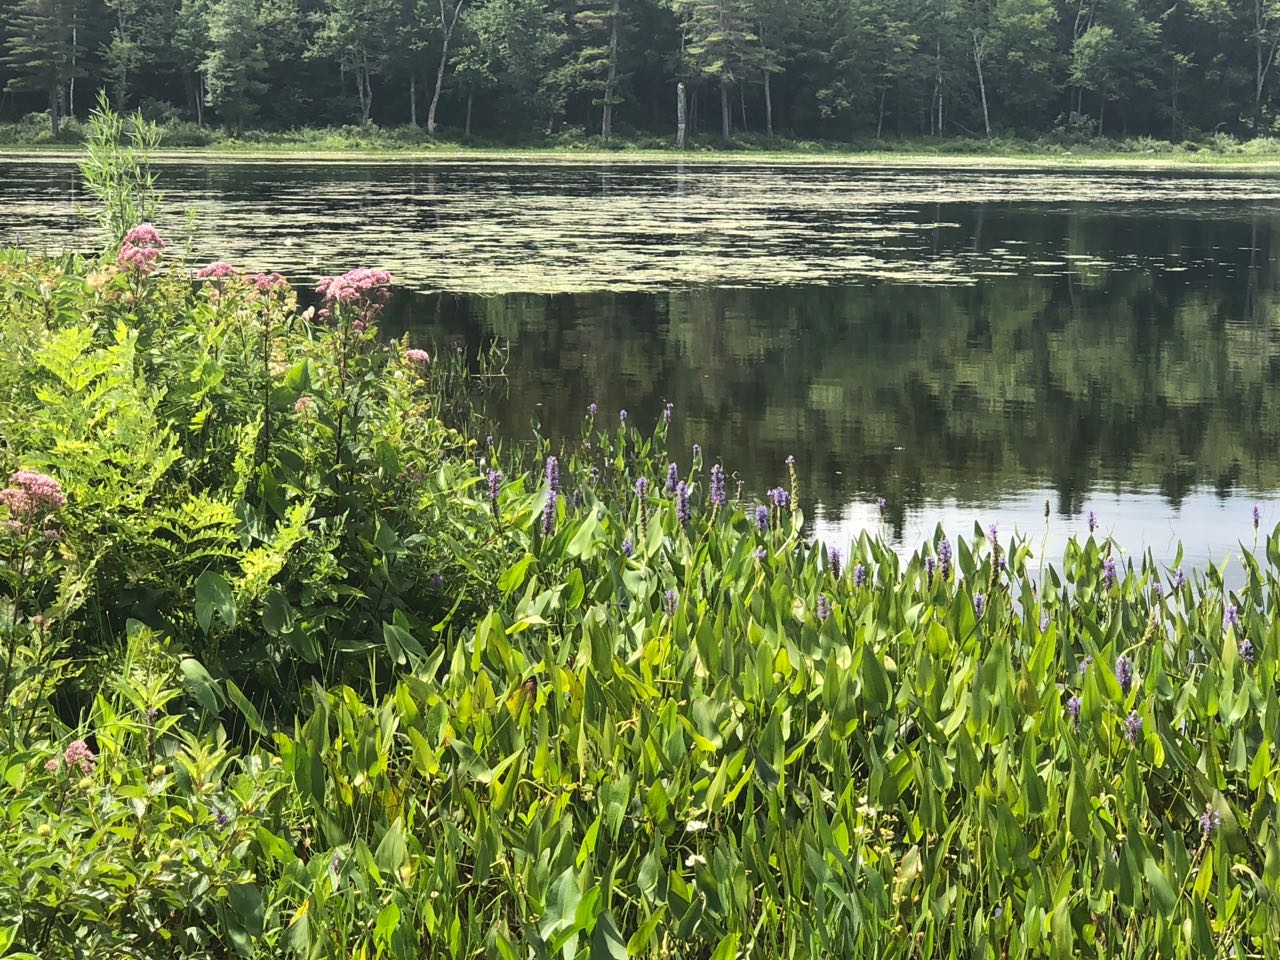 A perfect summer Sunday! &nbsp;Blue skies, warm weather, a light breeze and nature abound at Lake MacDowell, Peterborough, NH.